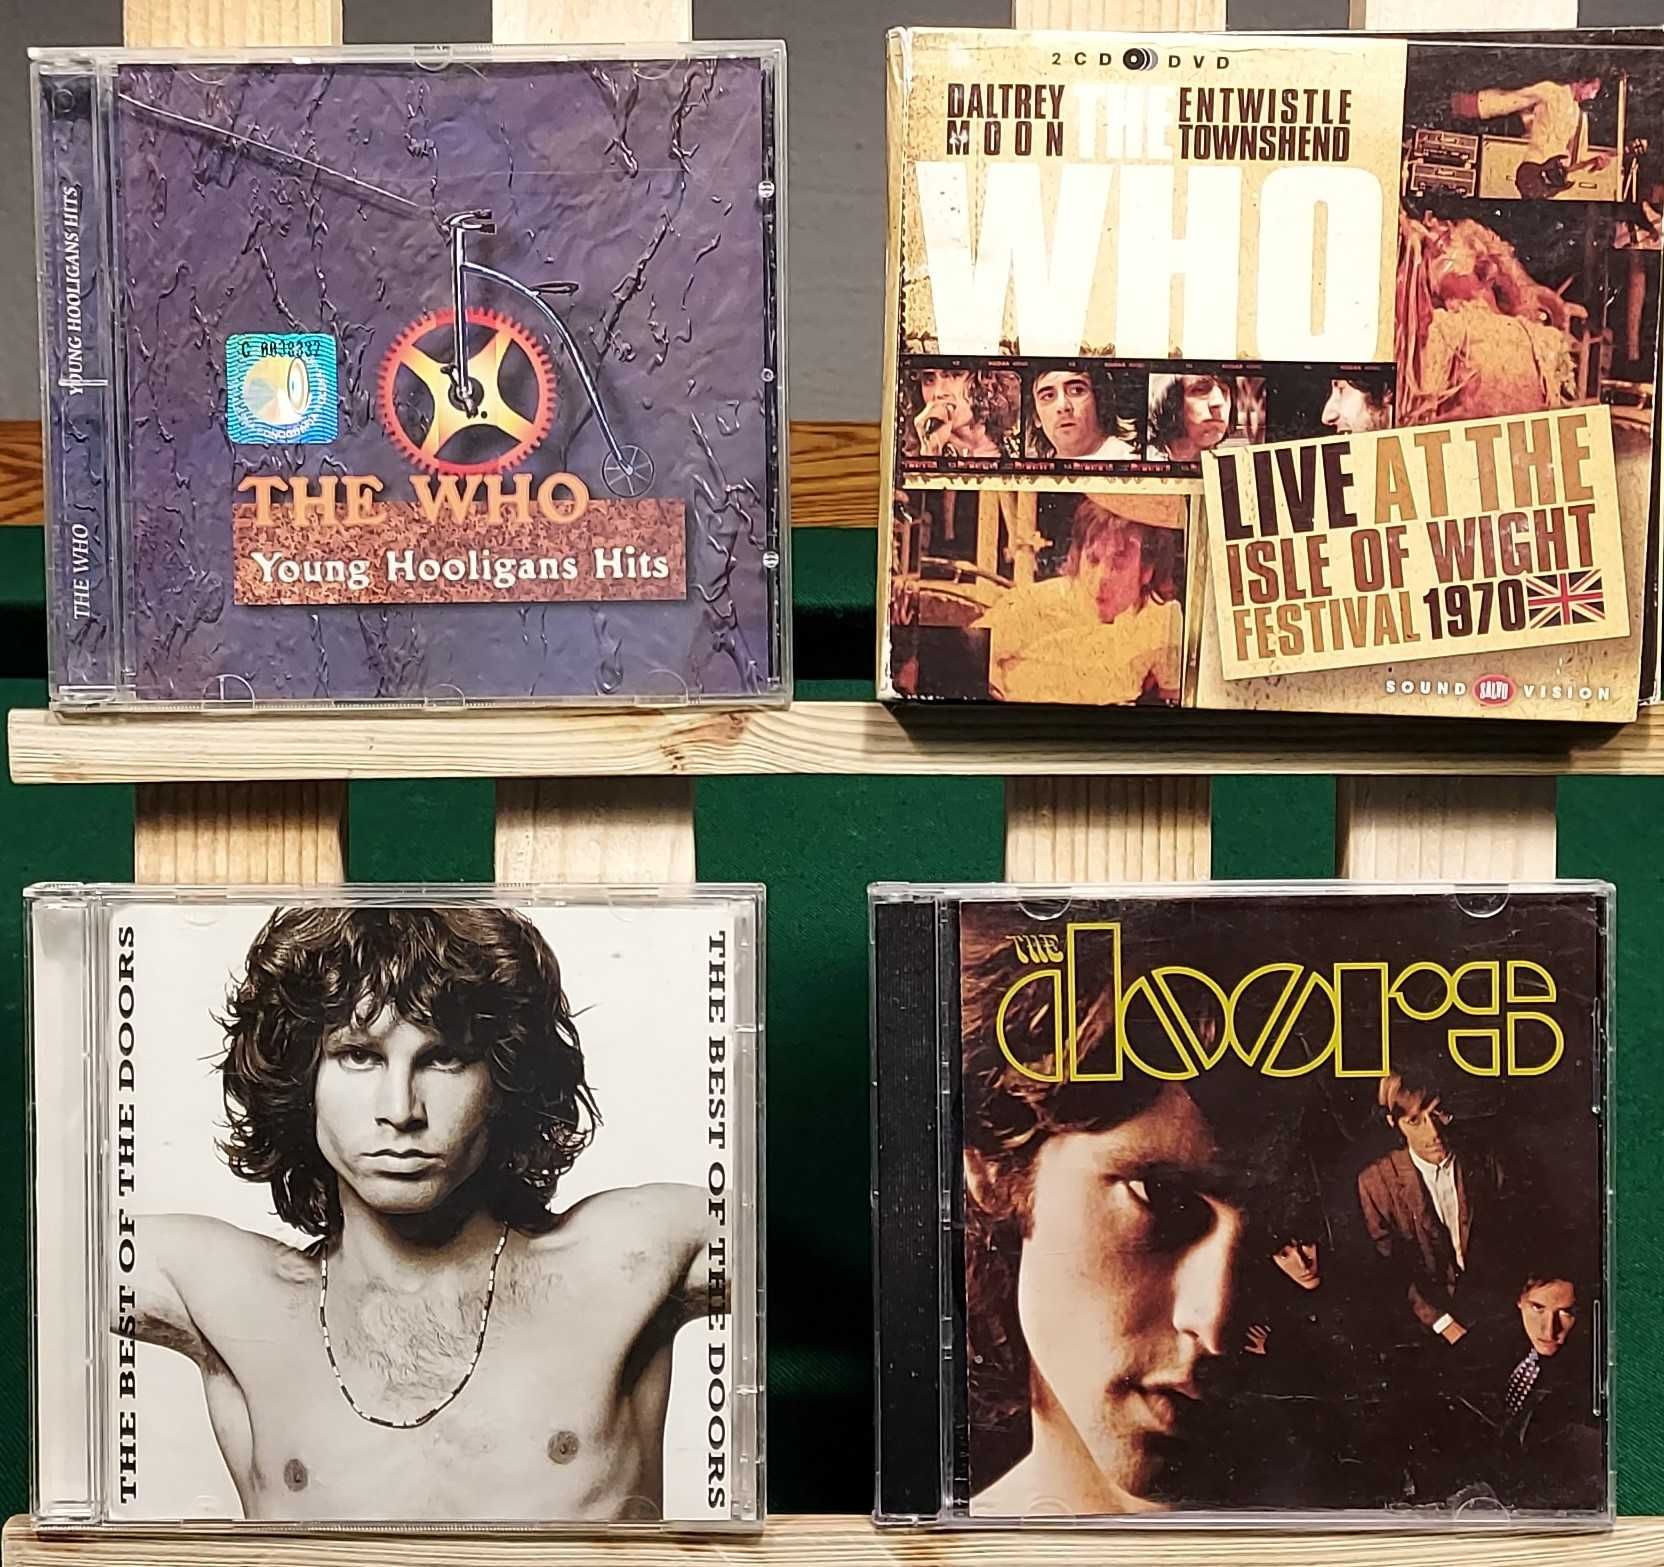 CD - Queen, the Who, Megadeth, Slayer i inne